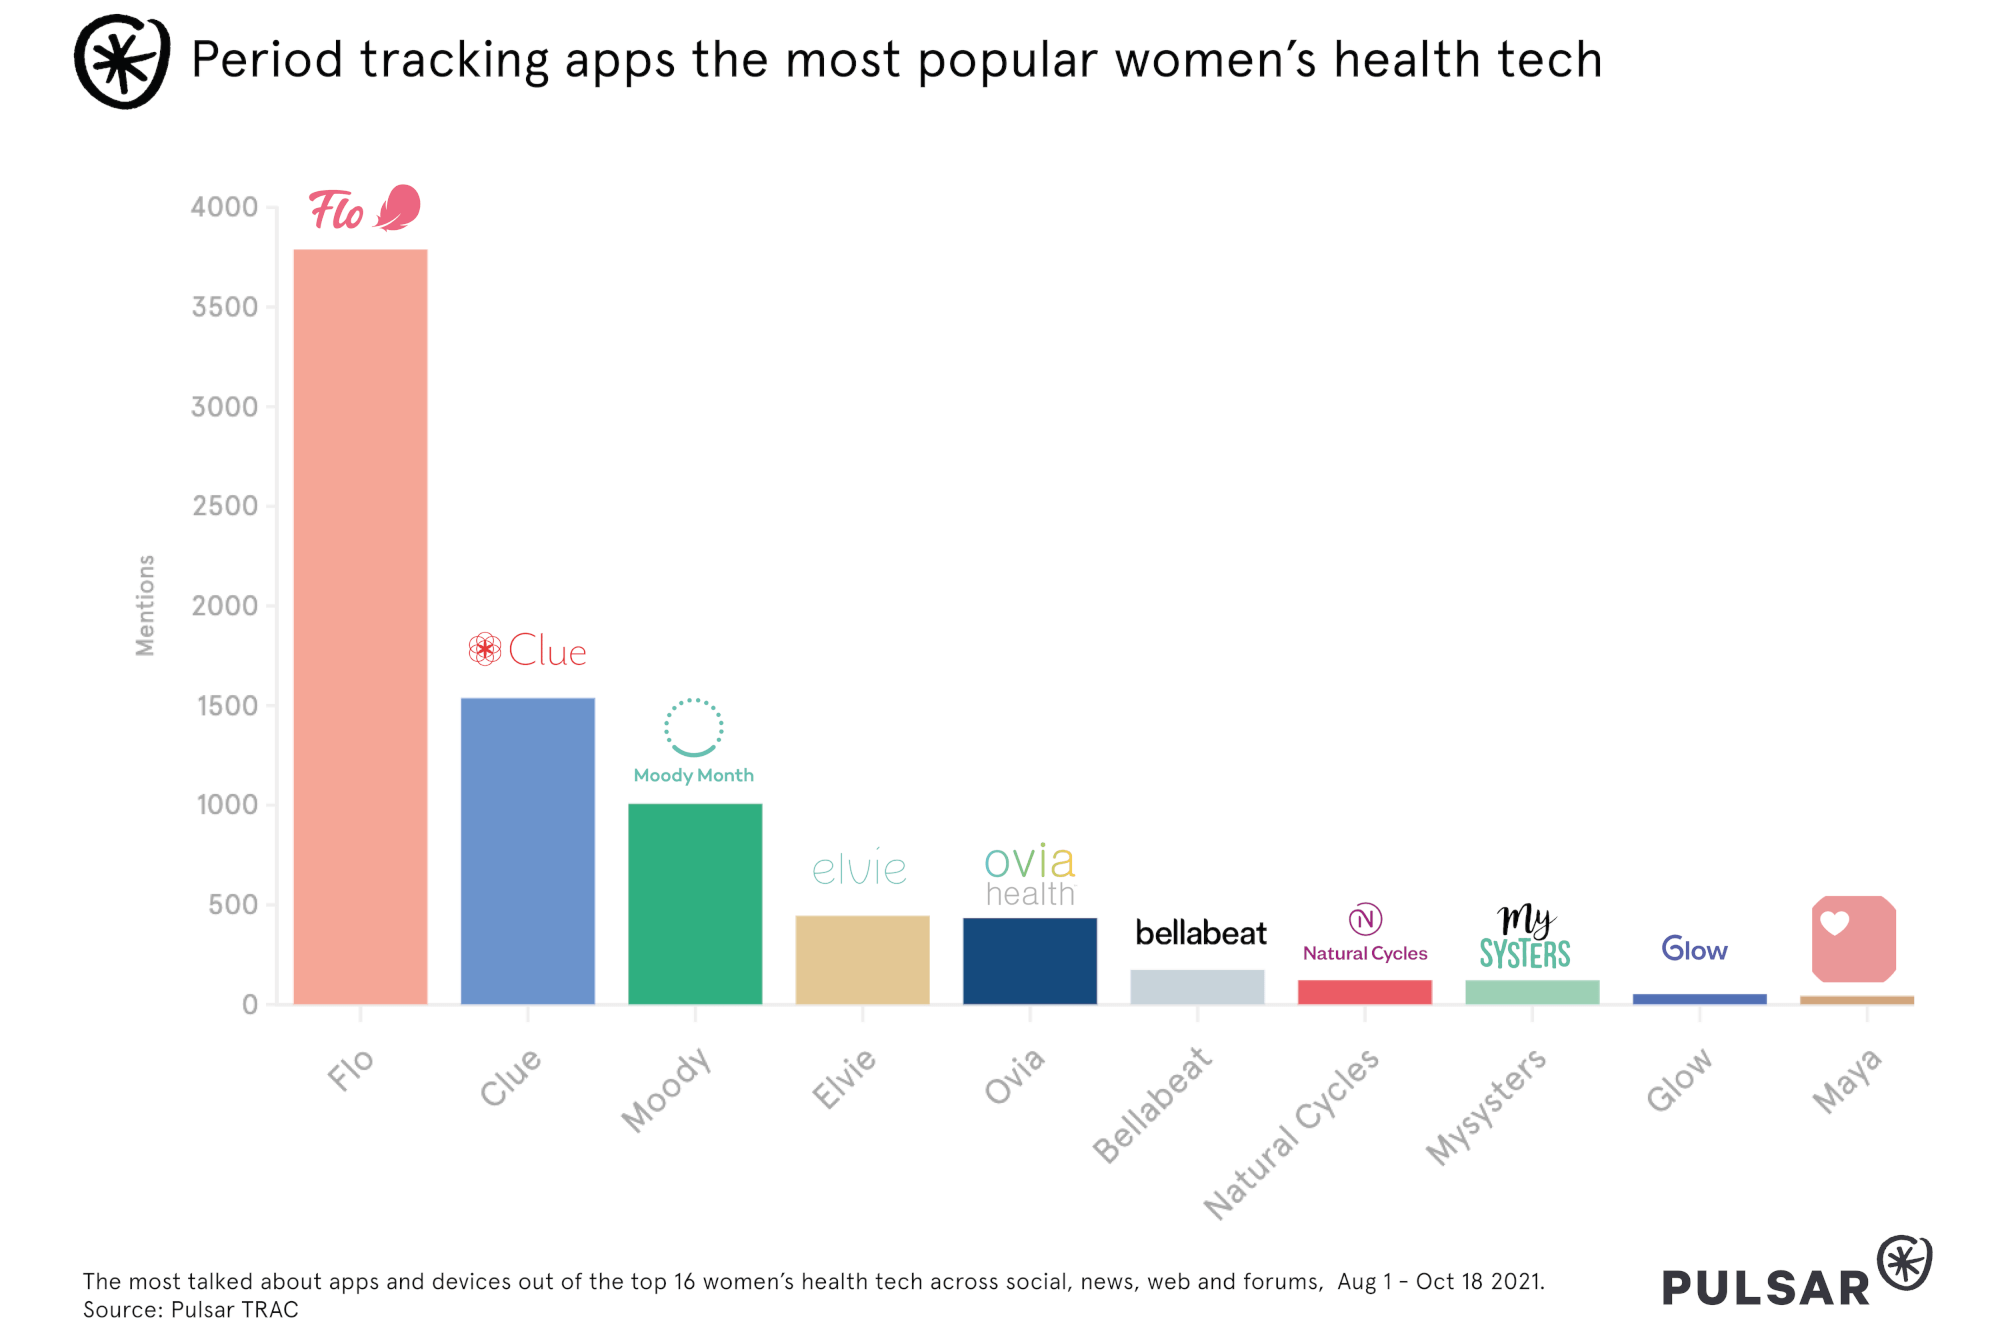 Period tracking apps the most popular women's health tech